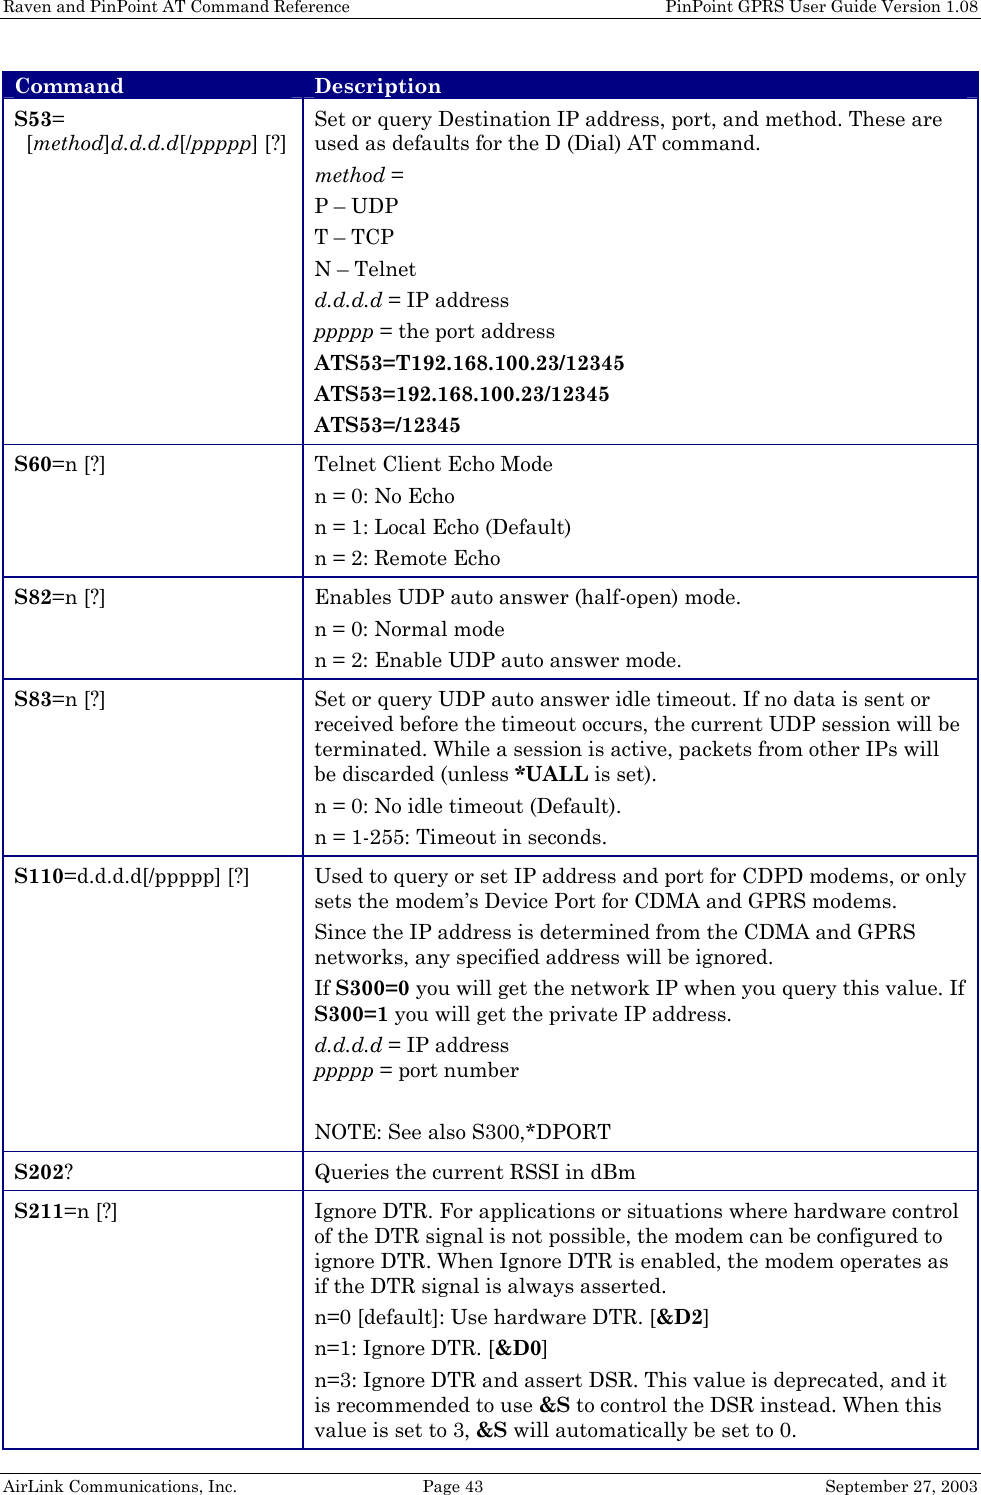 Raven and PinPoint AT Command Reference    PinPoint GPRS User Guide Version 1.08 AirLink Communications, Inc.  Page 43  September 27, 2003 Command Description S53=   [method]d.d.d.d[/ppppp] [?] Set or query Destination IP address, port, and method. These are used as defaults for the D (Dial) AT command. method = P – UDP T – TCP N – Telnet d.d.d.d = IP address ppppp = the port address ATS53=T192.168.100.23/12345 ATS53=192.168.100.23/12345 ATS53=/12345 S60=n [?] Telnet Client Echo Mode n = 0: No Echo n = 1: Local Echo (Default) n = 2: Remote Echo S82=n [?] Enables UDP auto answer (half-open) mode. n = 0: Normal mode n = 2: Enable UDP auto answer mode. S83=n [?] Set or query UDP auto answer idle timeout. If no data is sent or received before the timeout occurs, the current UDP session will be terminated. While a session is active, packets from other IPs will be discarded (unless *UALL is set). n = 0: No idle timeout (Default). n = 1-255: Timeout in seconds. S110=d.d.d.d[/ppppp] [?] Used to query or set IP address and port for CDPD modems, or only sets the modem’s Device Port for CDMA and GPRS modems. Since the IP address is determined from the CDMA and GPRS networks, any specified address will be ignored.  If S300=0 you will get the network IP when you query this value. If S300=1 you will get the private IP address. d.d.d.d = IP address ppppp = port number  NOTE: See also S300,*DPORT S202? Queries the current RSSI in dBm S211=n [?] Ignore DTR. For applications or situations where hardware control of the DTR signal is not possible, the modem can be configured to ignore DTR. When Ignore DTR is enabled, the modem operates as if the DTR signal is always asserted. n=0 [default]: Use hardware DTR. [&amp;D2] n=1: Ignore DTR. [&amp;D0] n=3: Ignore DTR and assert DSR. This value is deprecated, and it is recommended to use &amp;S to control the DSR instead. When this value is set to 3, &amp;S will automatically be set to 0. 